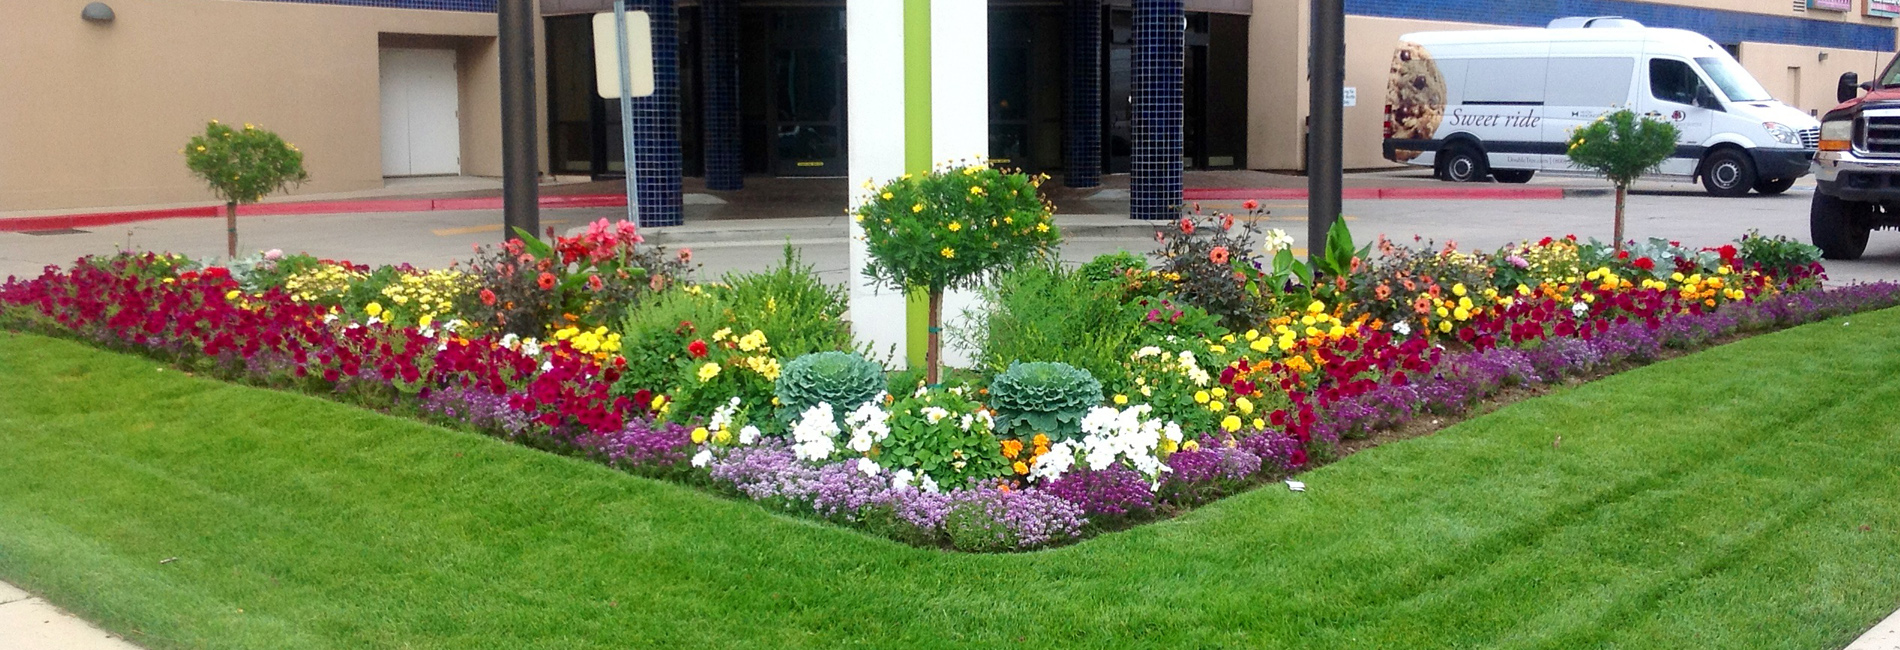 Commercial Landscaping ServicesProfessional | Reliable | Experienced